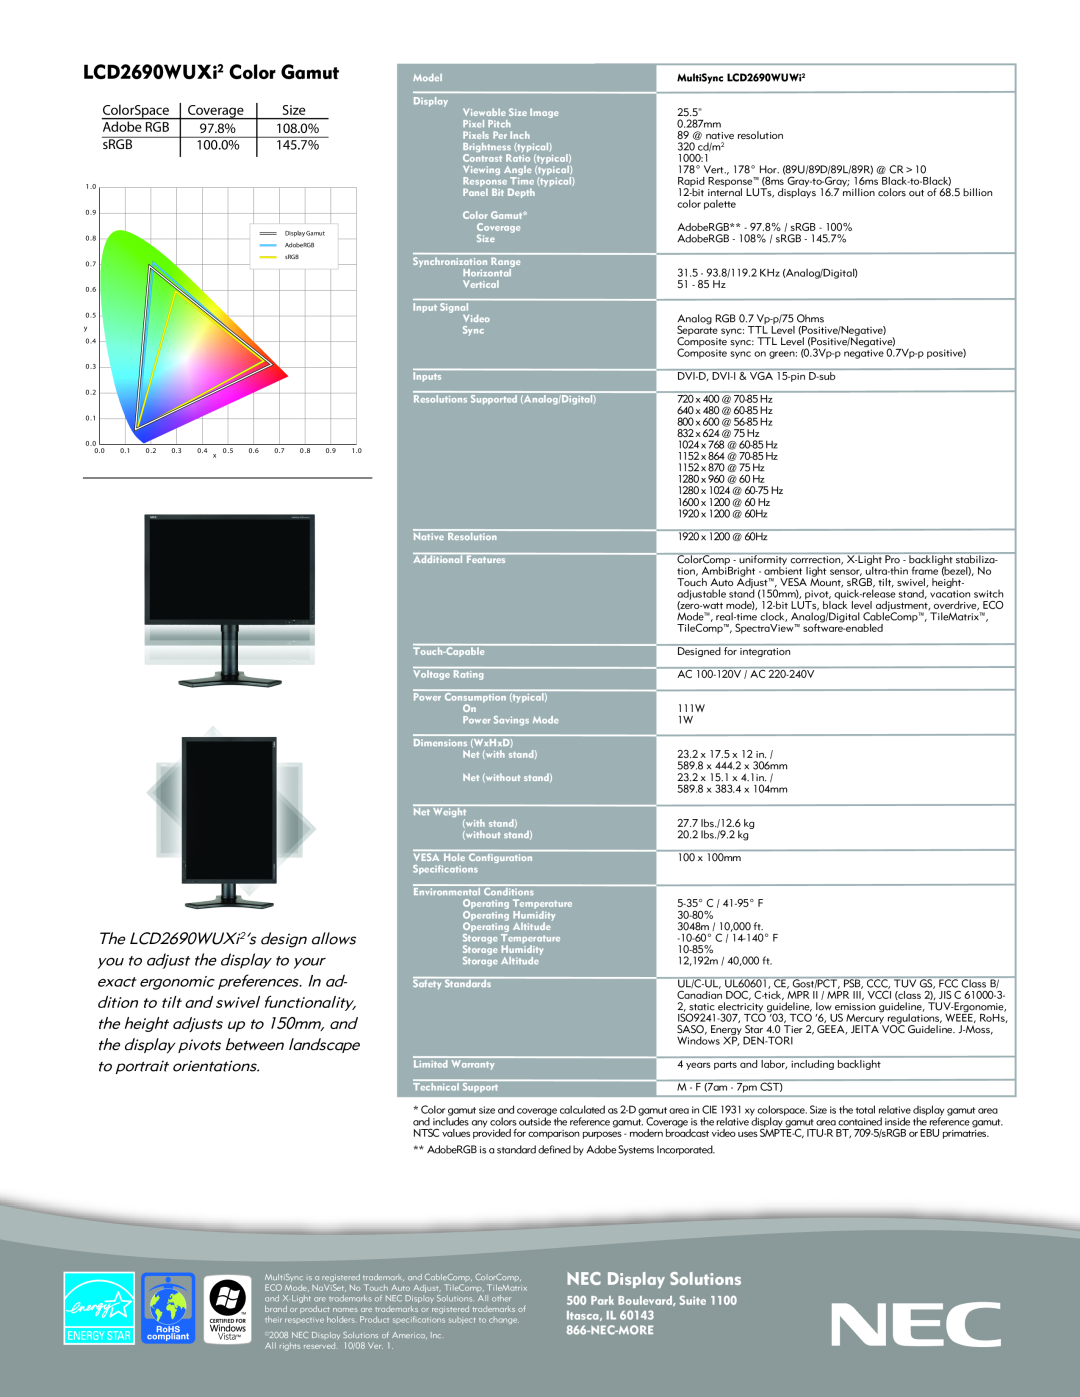 NEC manual LCD2690WUXi2 Color Gamut, NEC Display Solutions, Park Boulevard, Suite Itasca, IL 866-NEC-MORE 